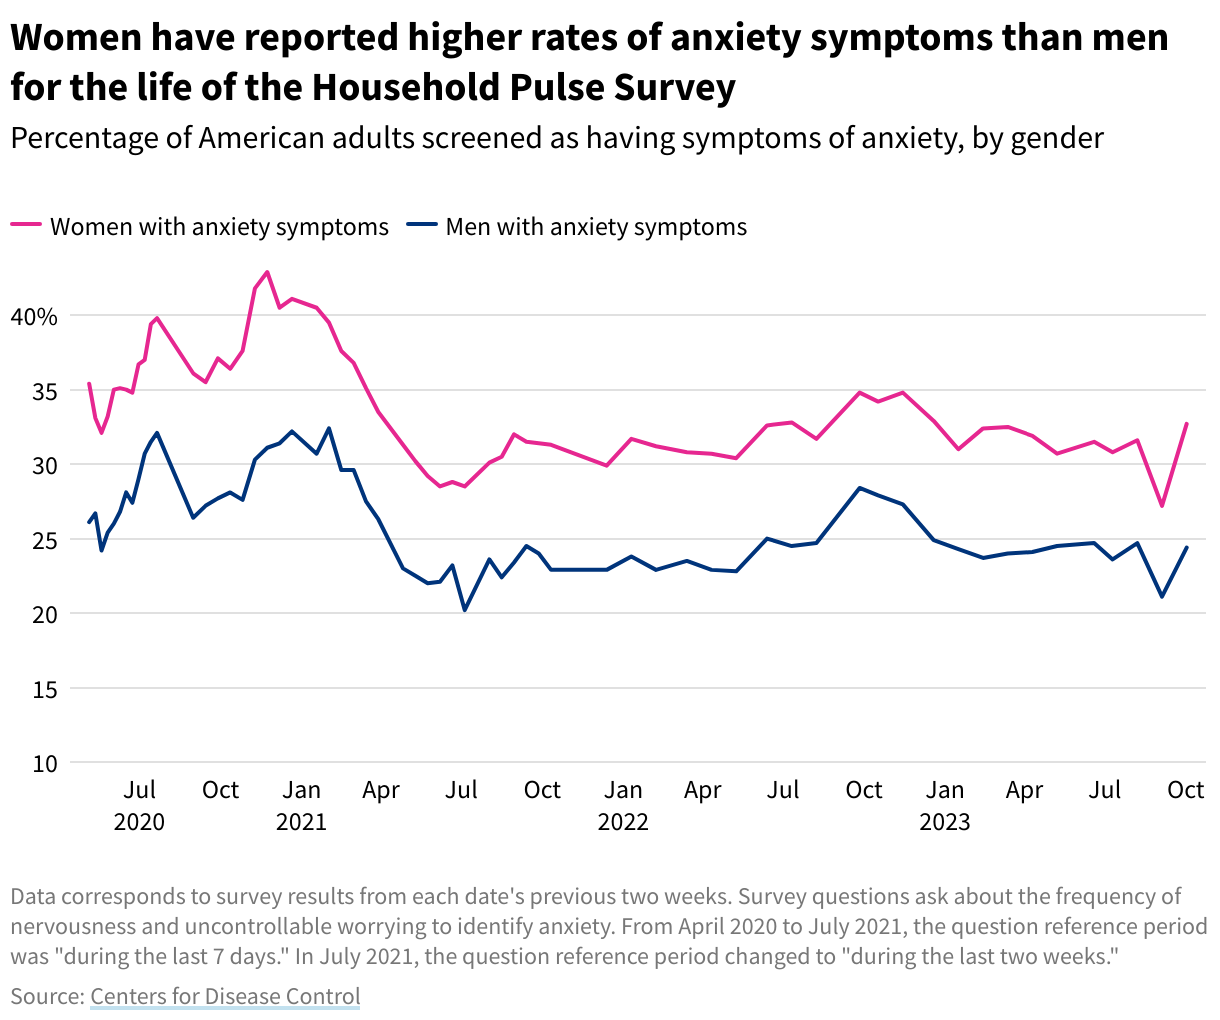 Line graph showing the percentage of American adults screened as having symptoms of anxiety, by gender. Since the Household Pulse Survey began in 2020, women have consistently reported higher rates of symptoms related to anxiety than men.